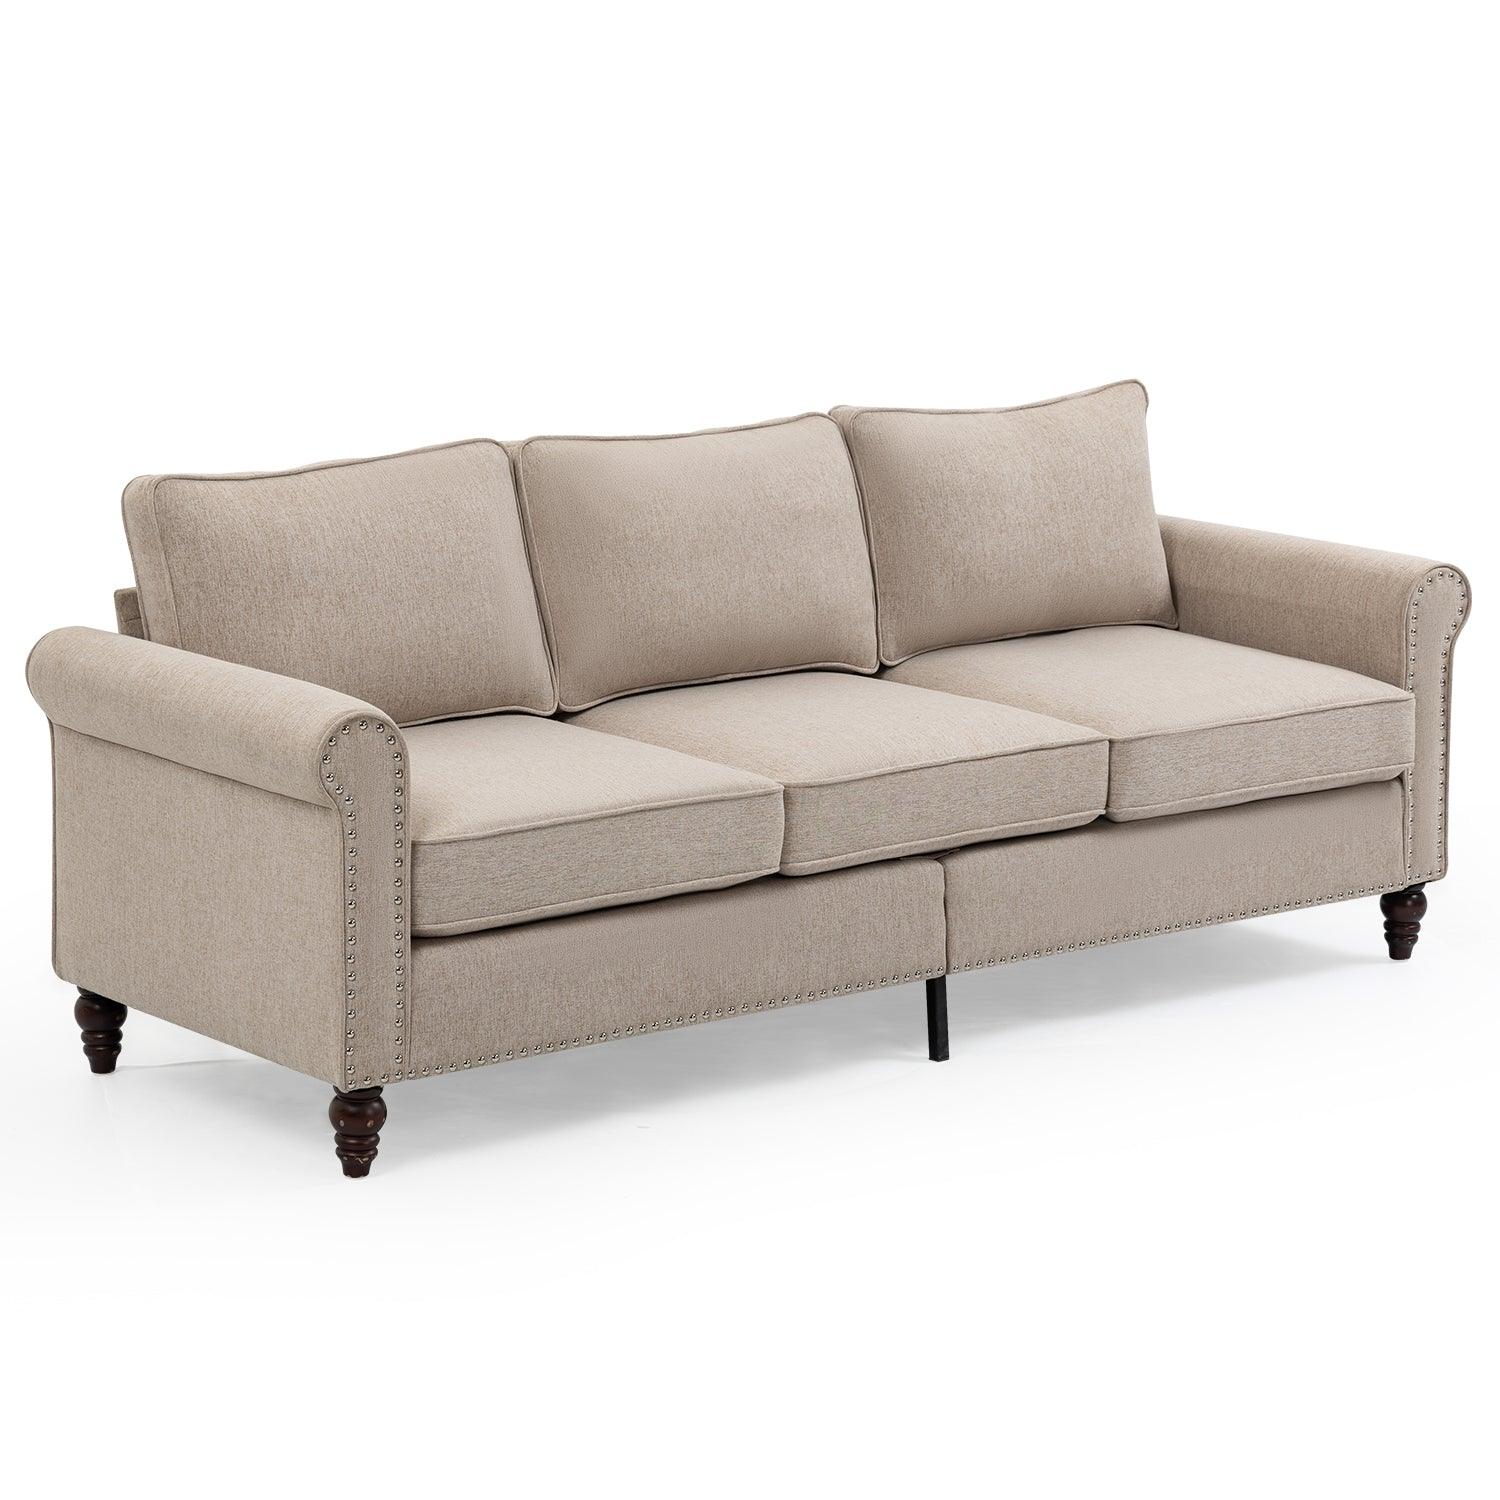 70 inch 3 Seater Loveseat Sofa, Mid Century Modern Couches for Living Room, Button Tufted Sofa LamCham